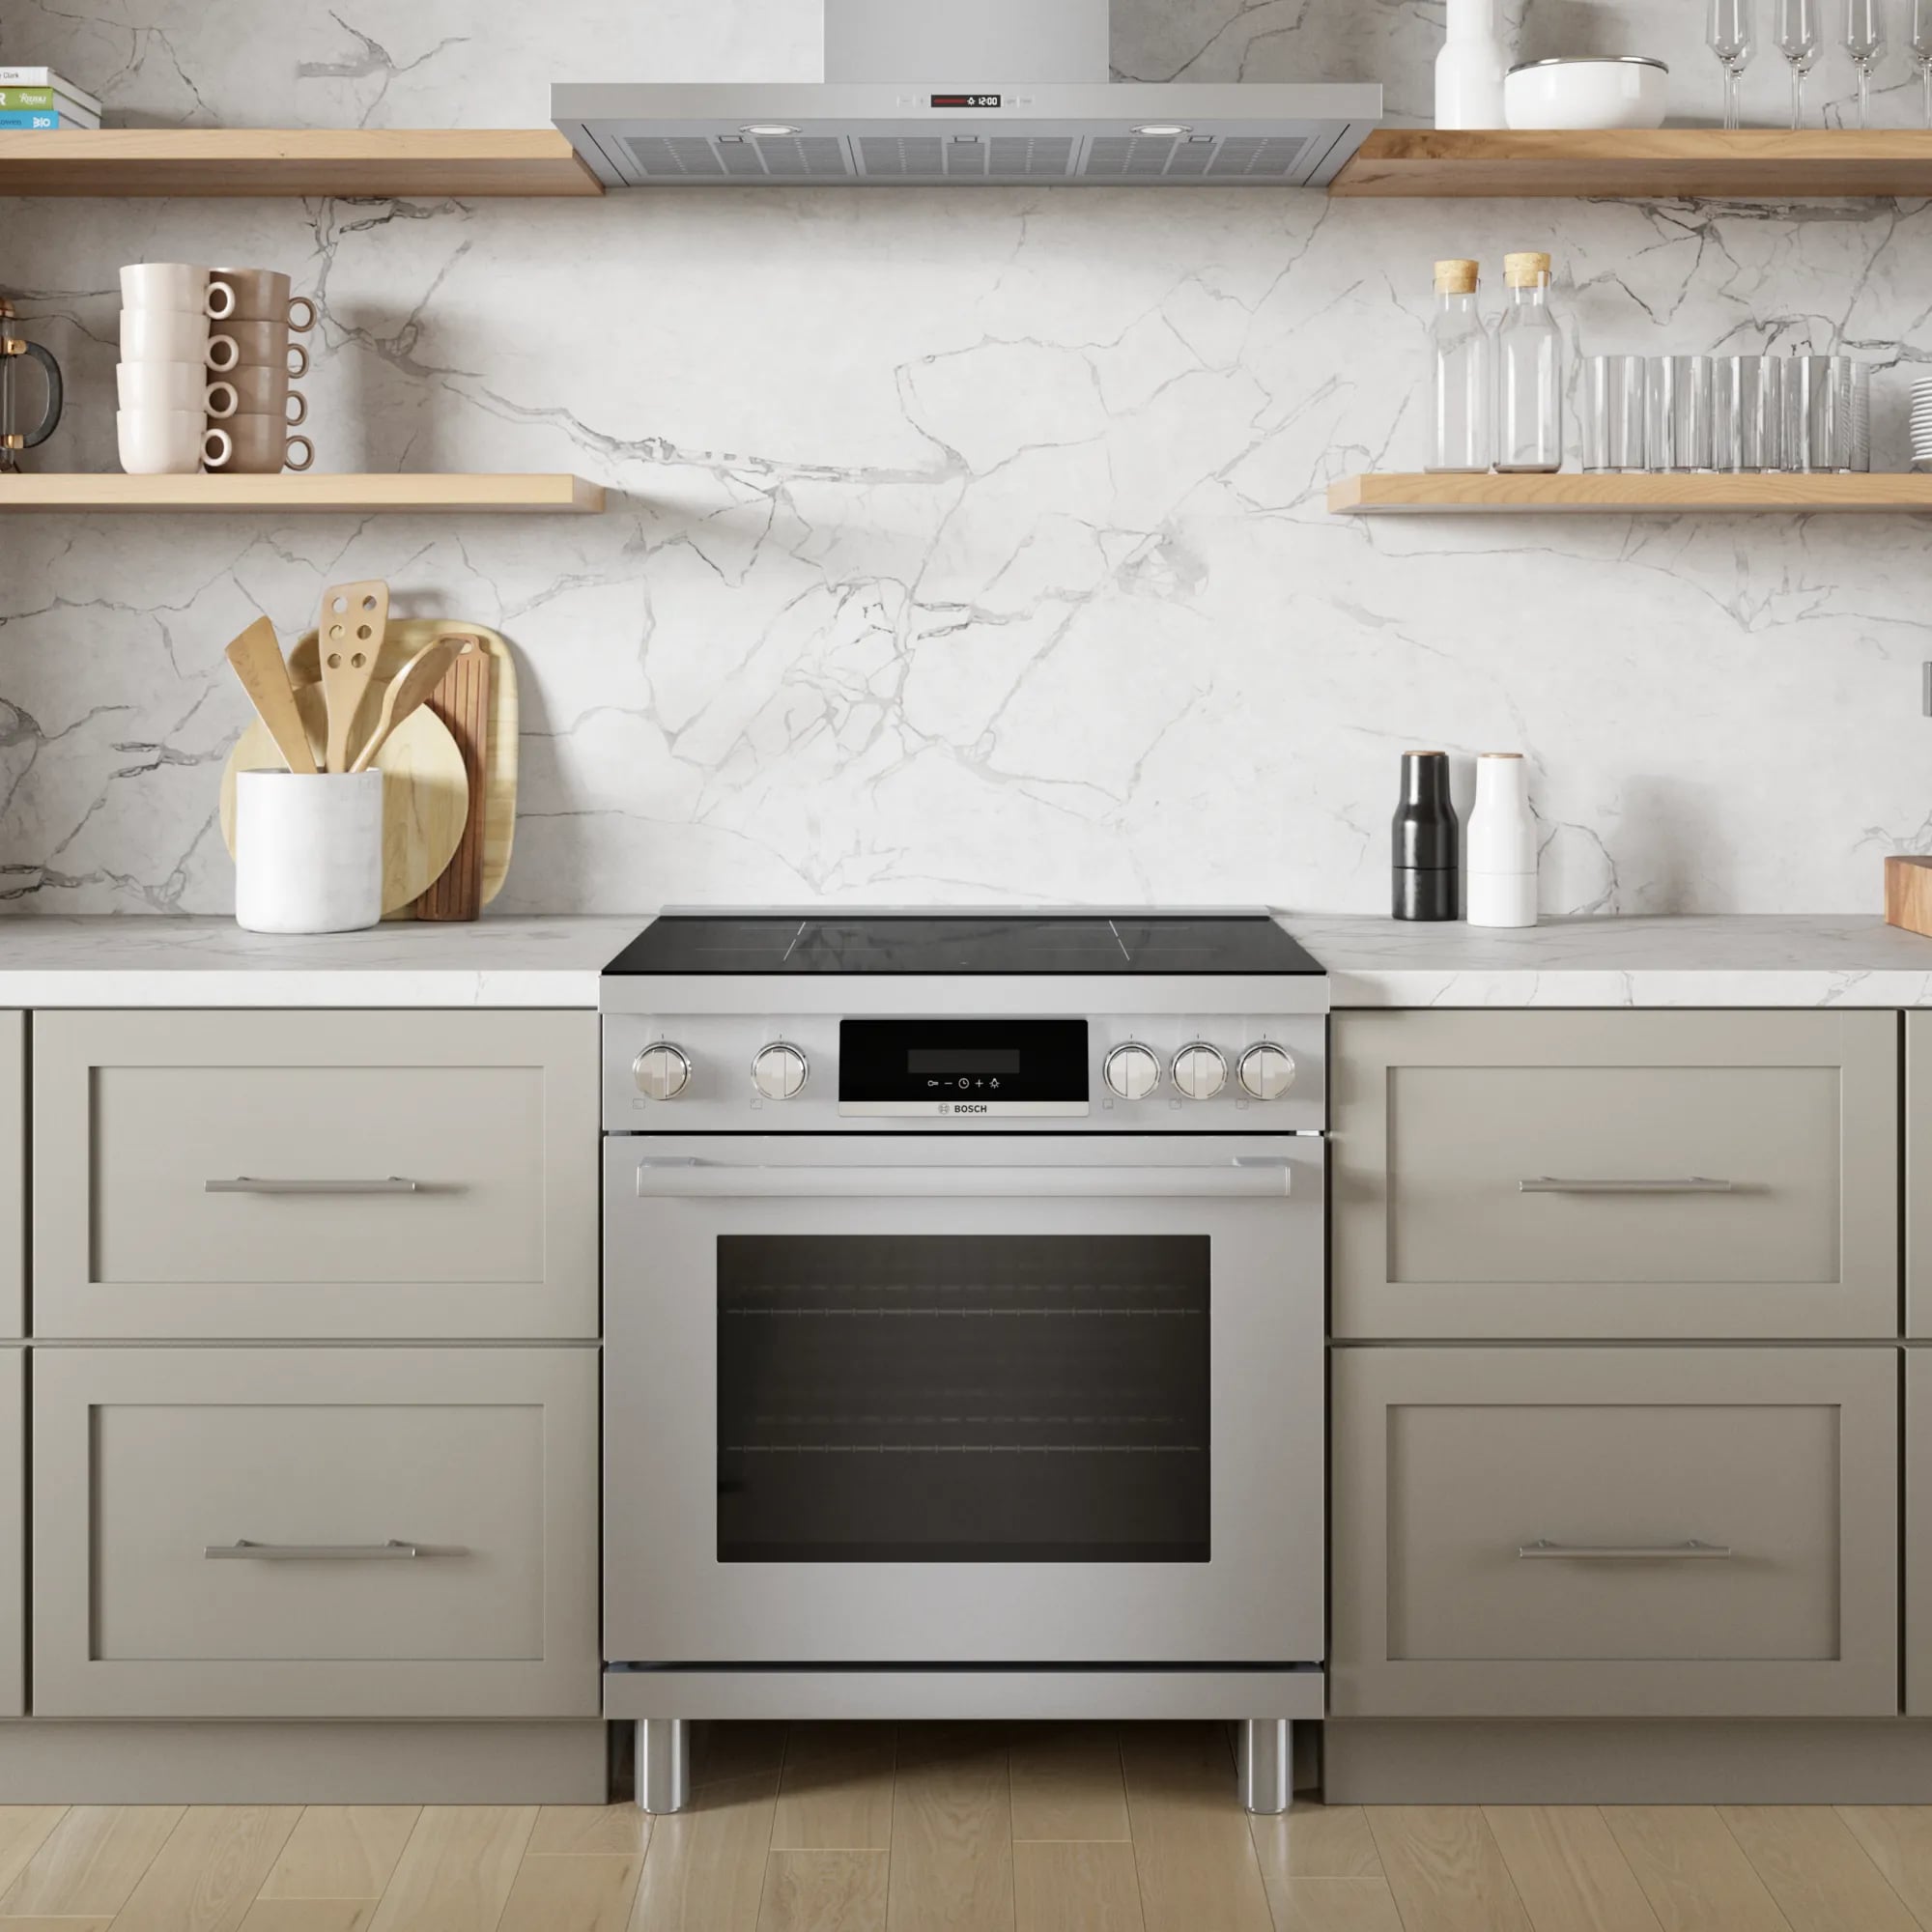 Bosch - 3.9 cu. ft  Induction Range in Stainless - HIS8055C